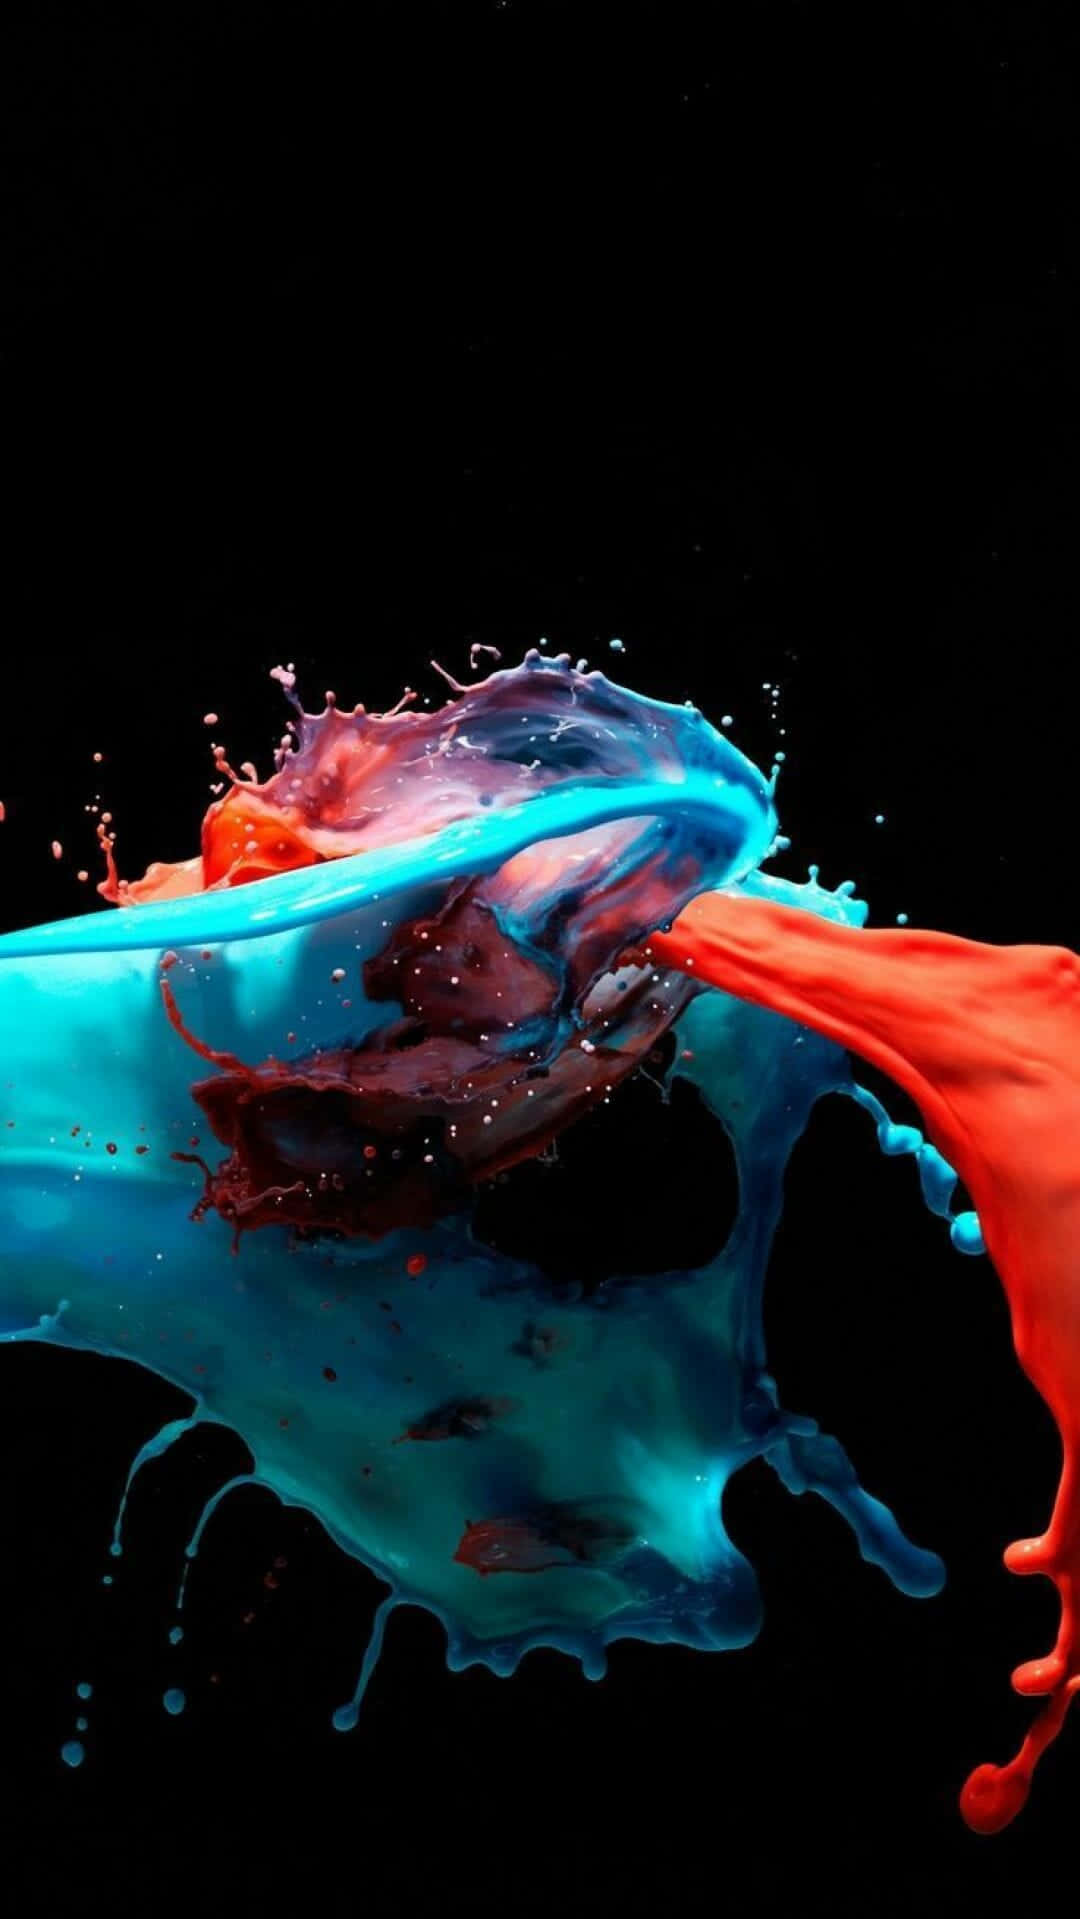 A Blue And Red Liquid Splashing Into A Black Background Wallpaper